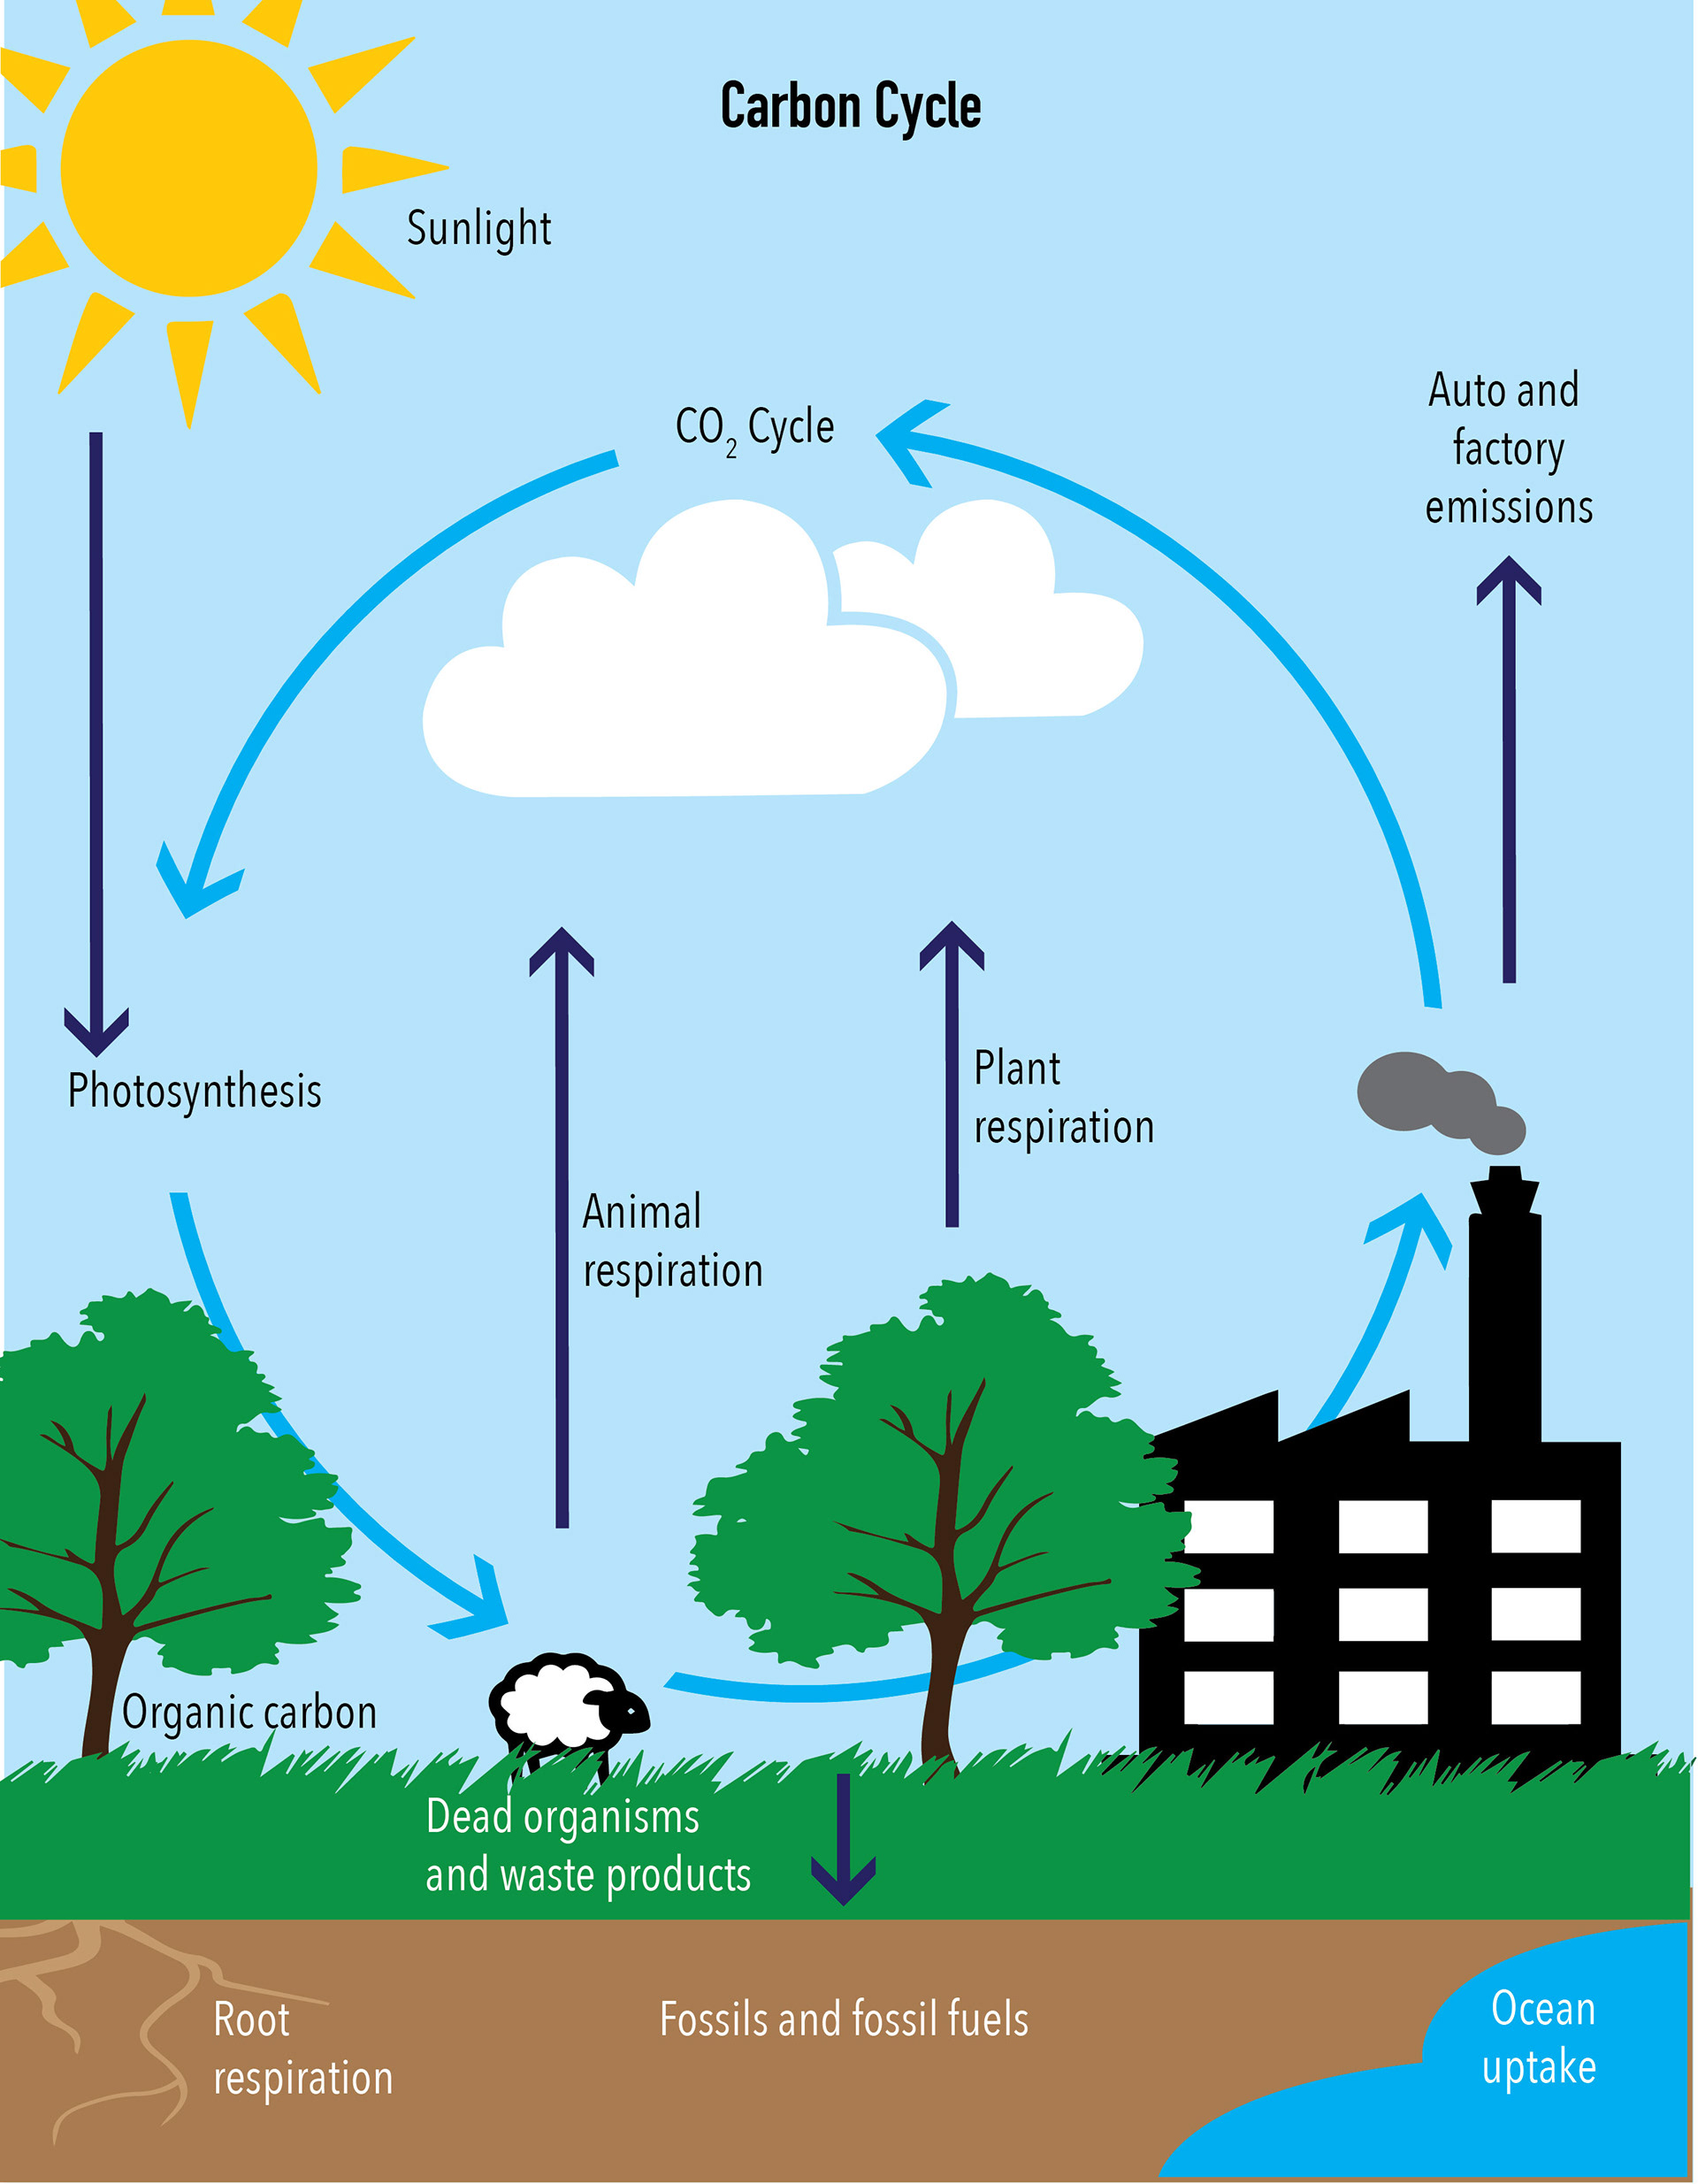 Use carbon dioxide. Carbon Cycle. Carbon Cycle diagram. Carbon dioxide and Oxygen Cycle. The Cycle of Carbon dioxide in nature.